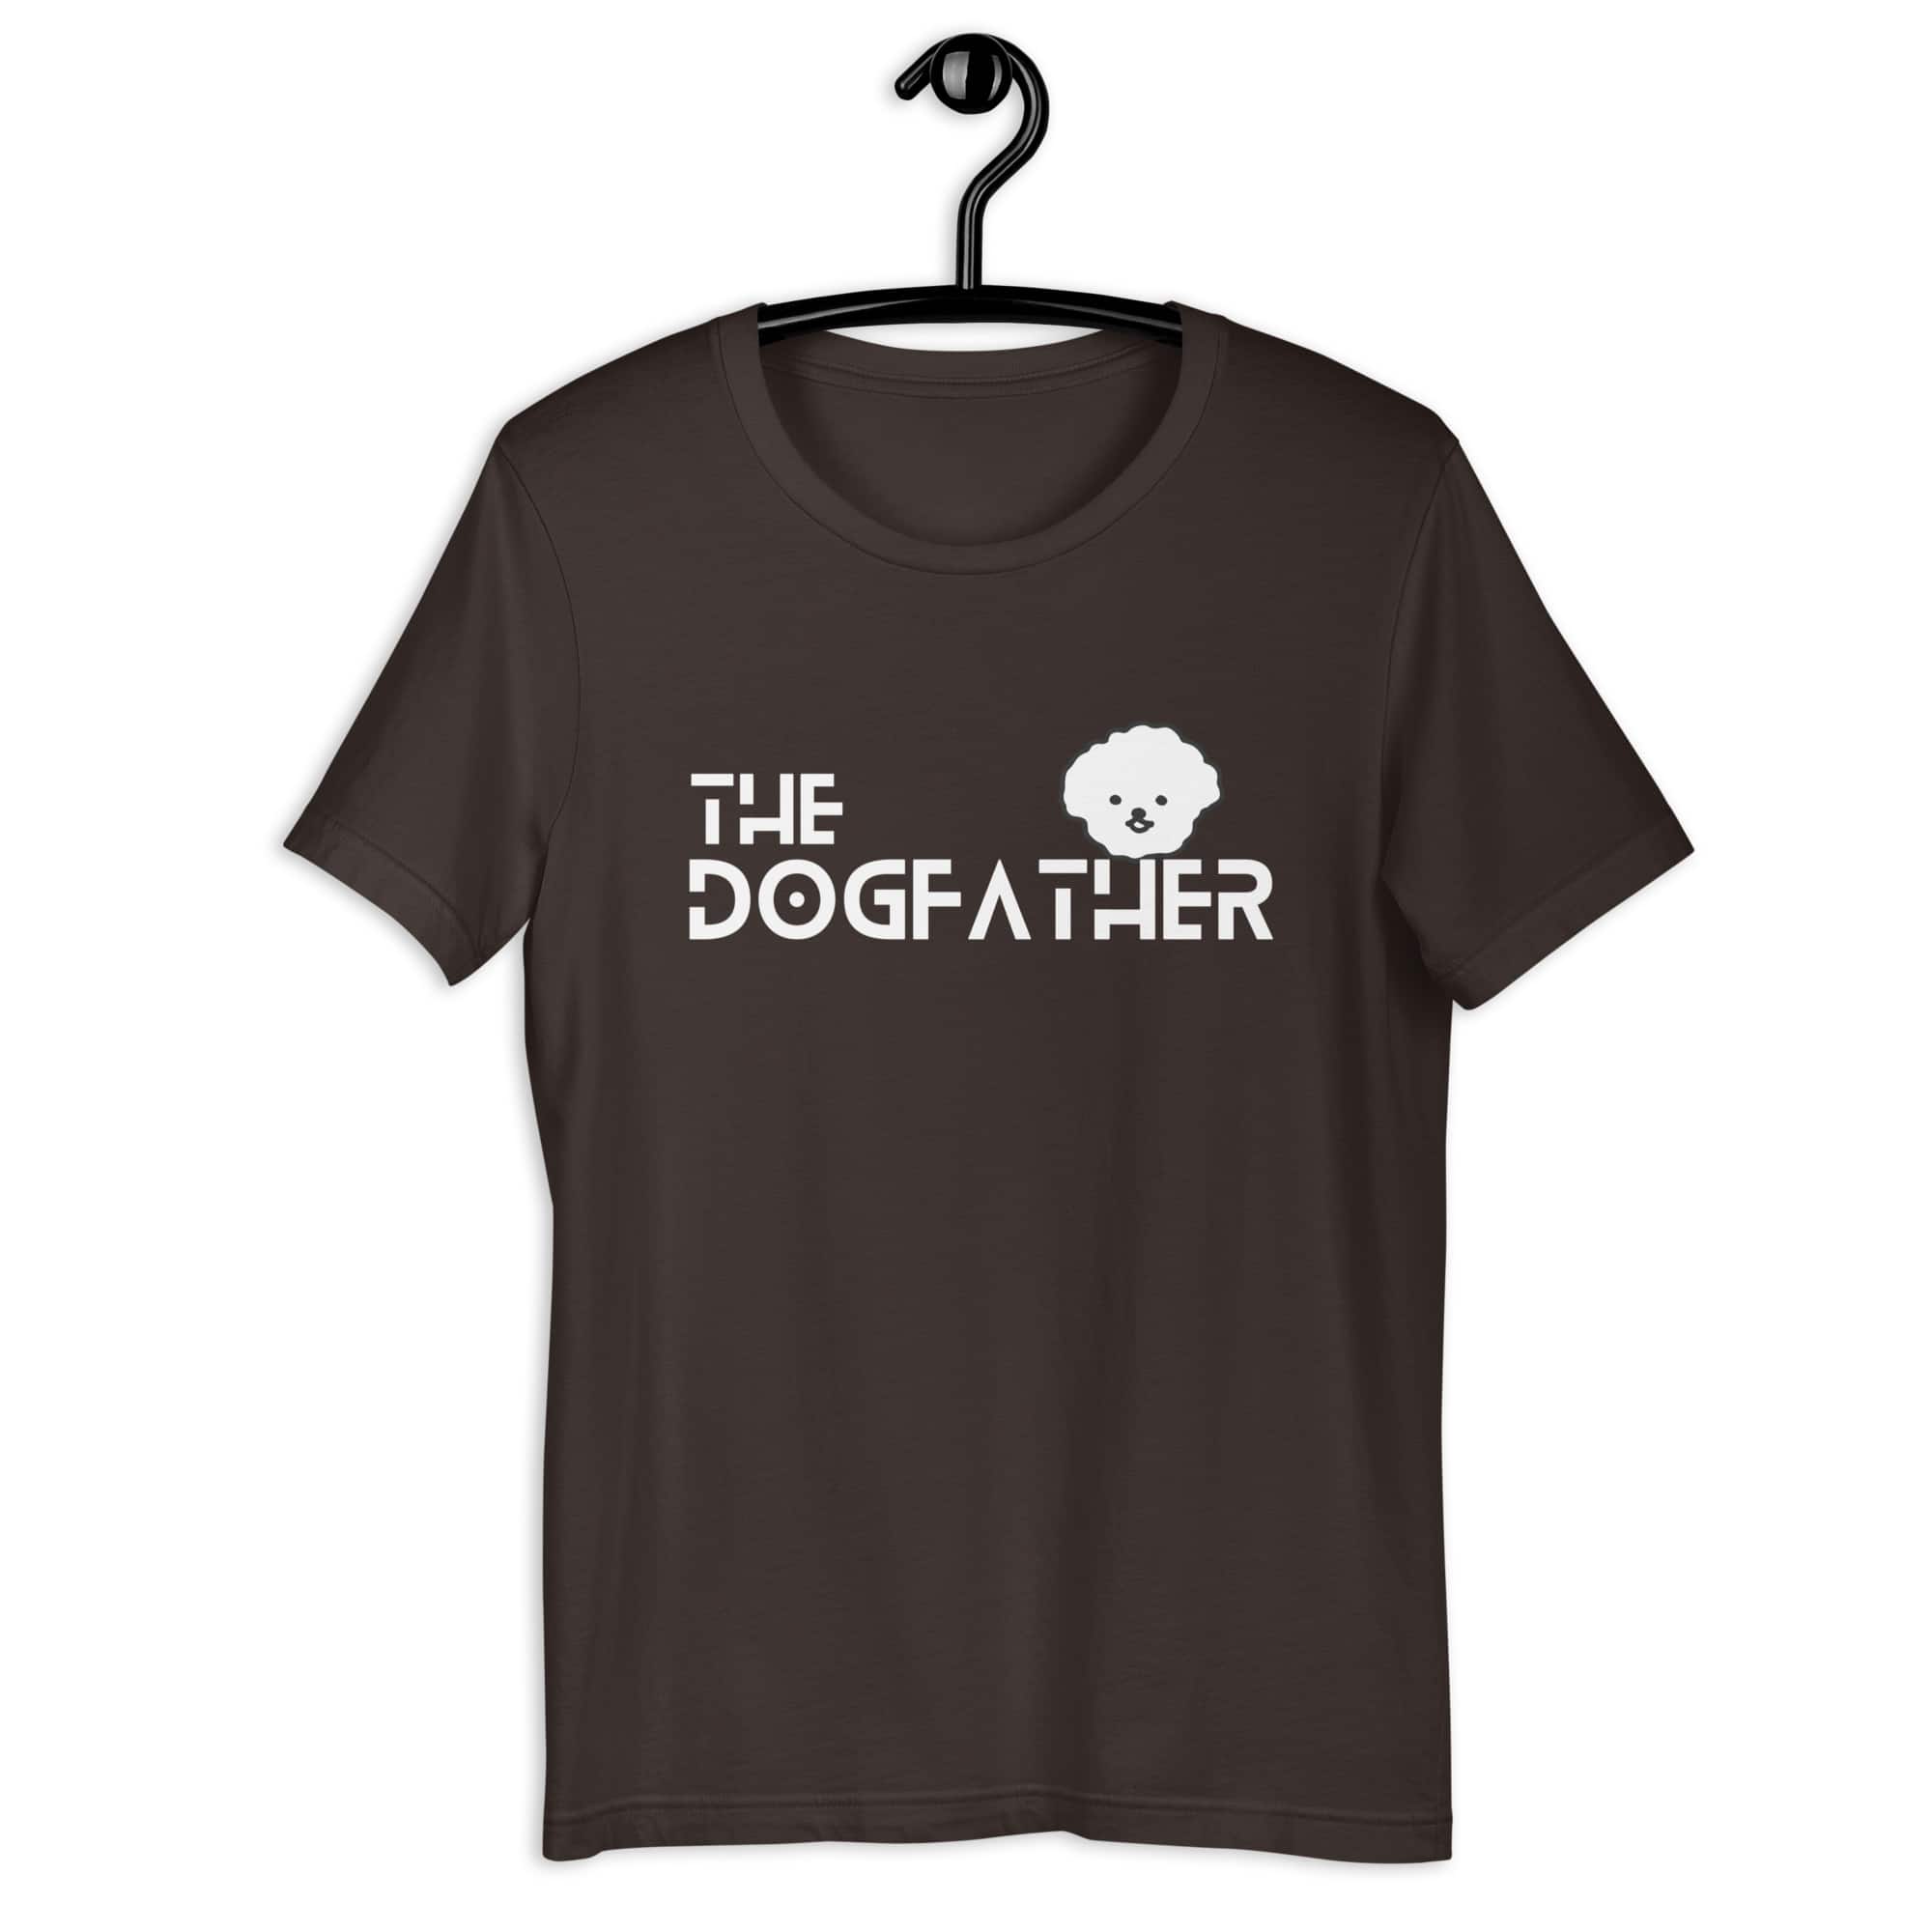 The Dogfather Poodles Unisex T-Shirt. Brown